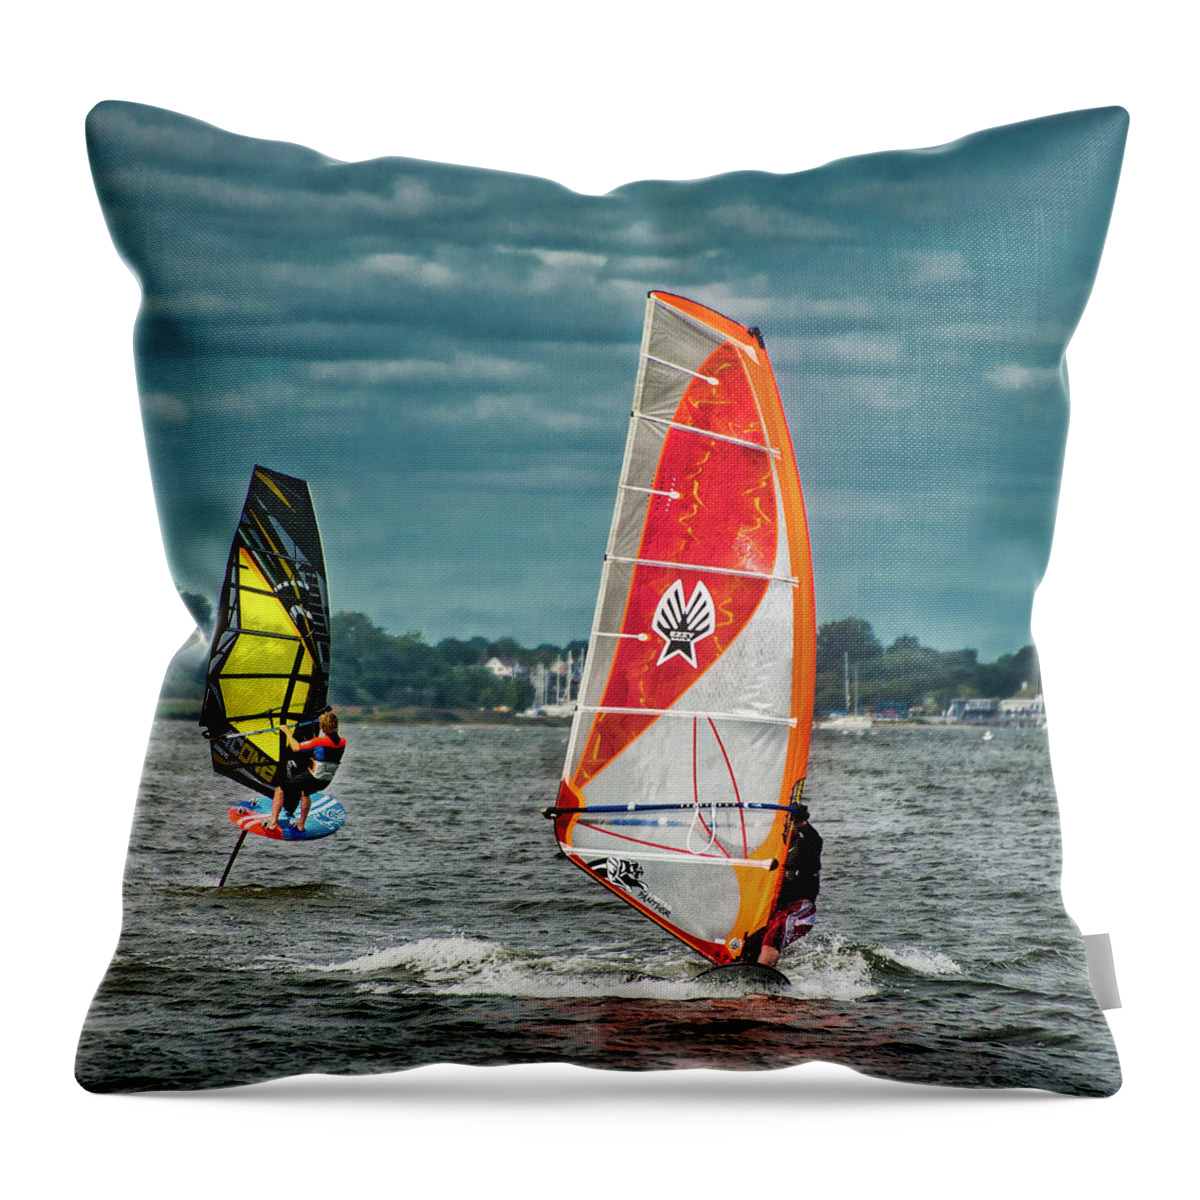 Speed Throw Pillow featuring the photograph The Ups And Downs Of Windsurfing by Gary Slawsky